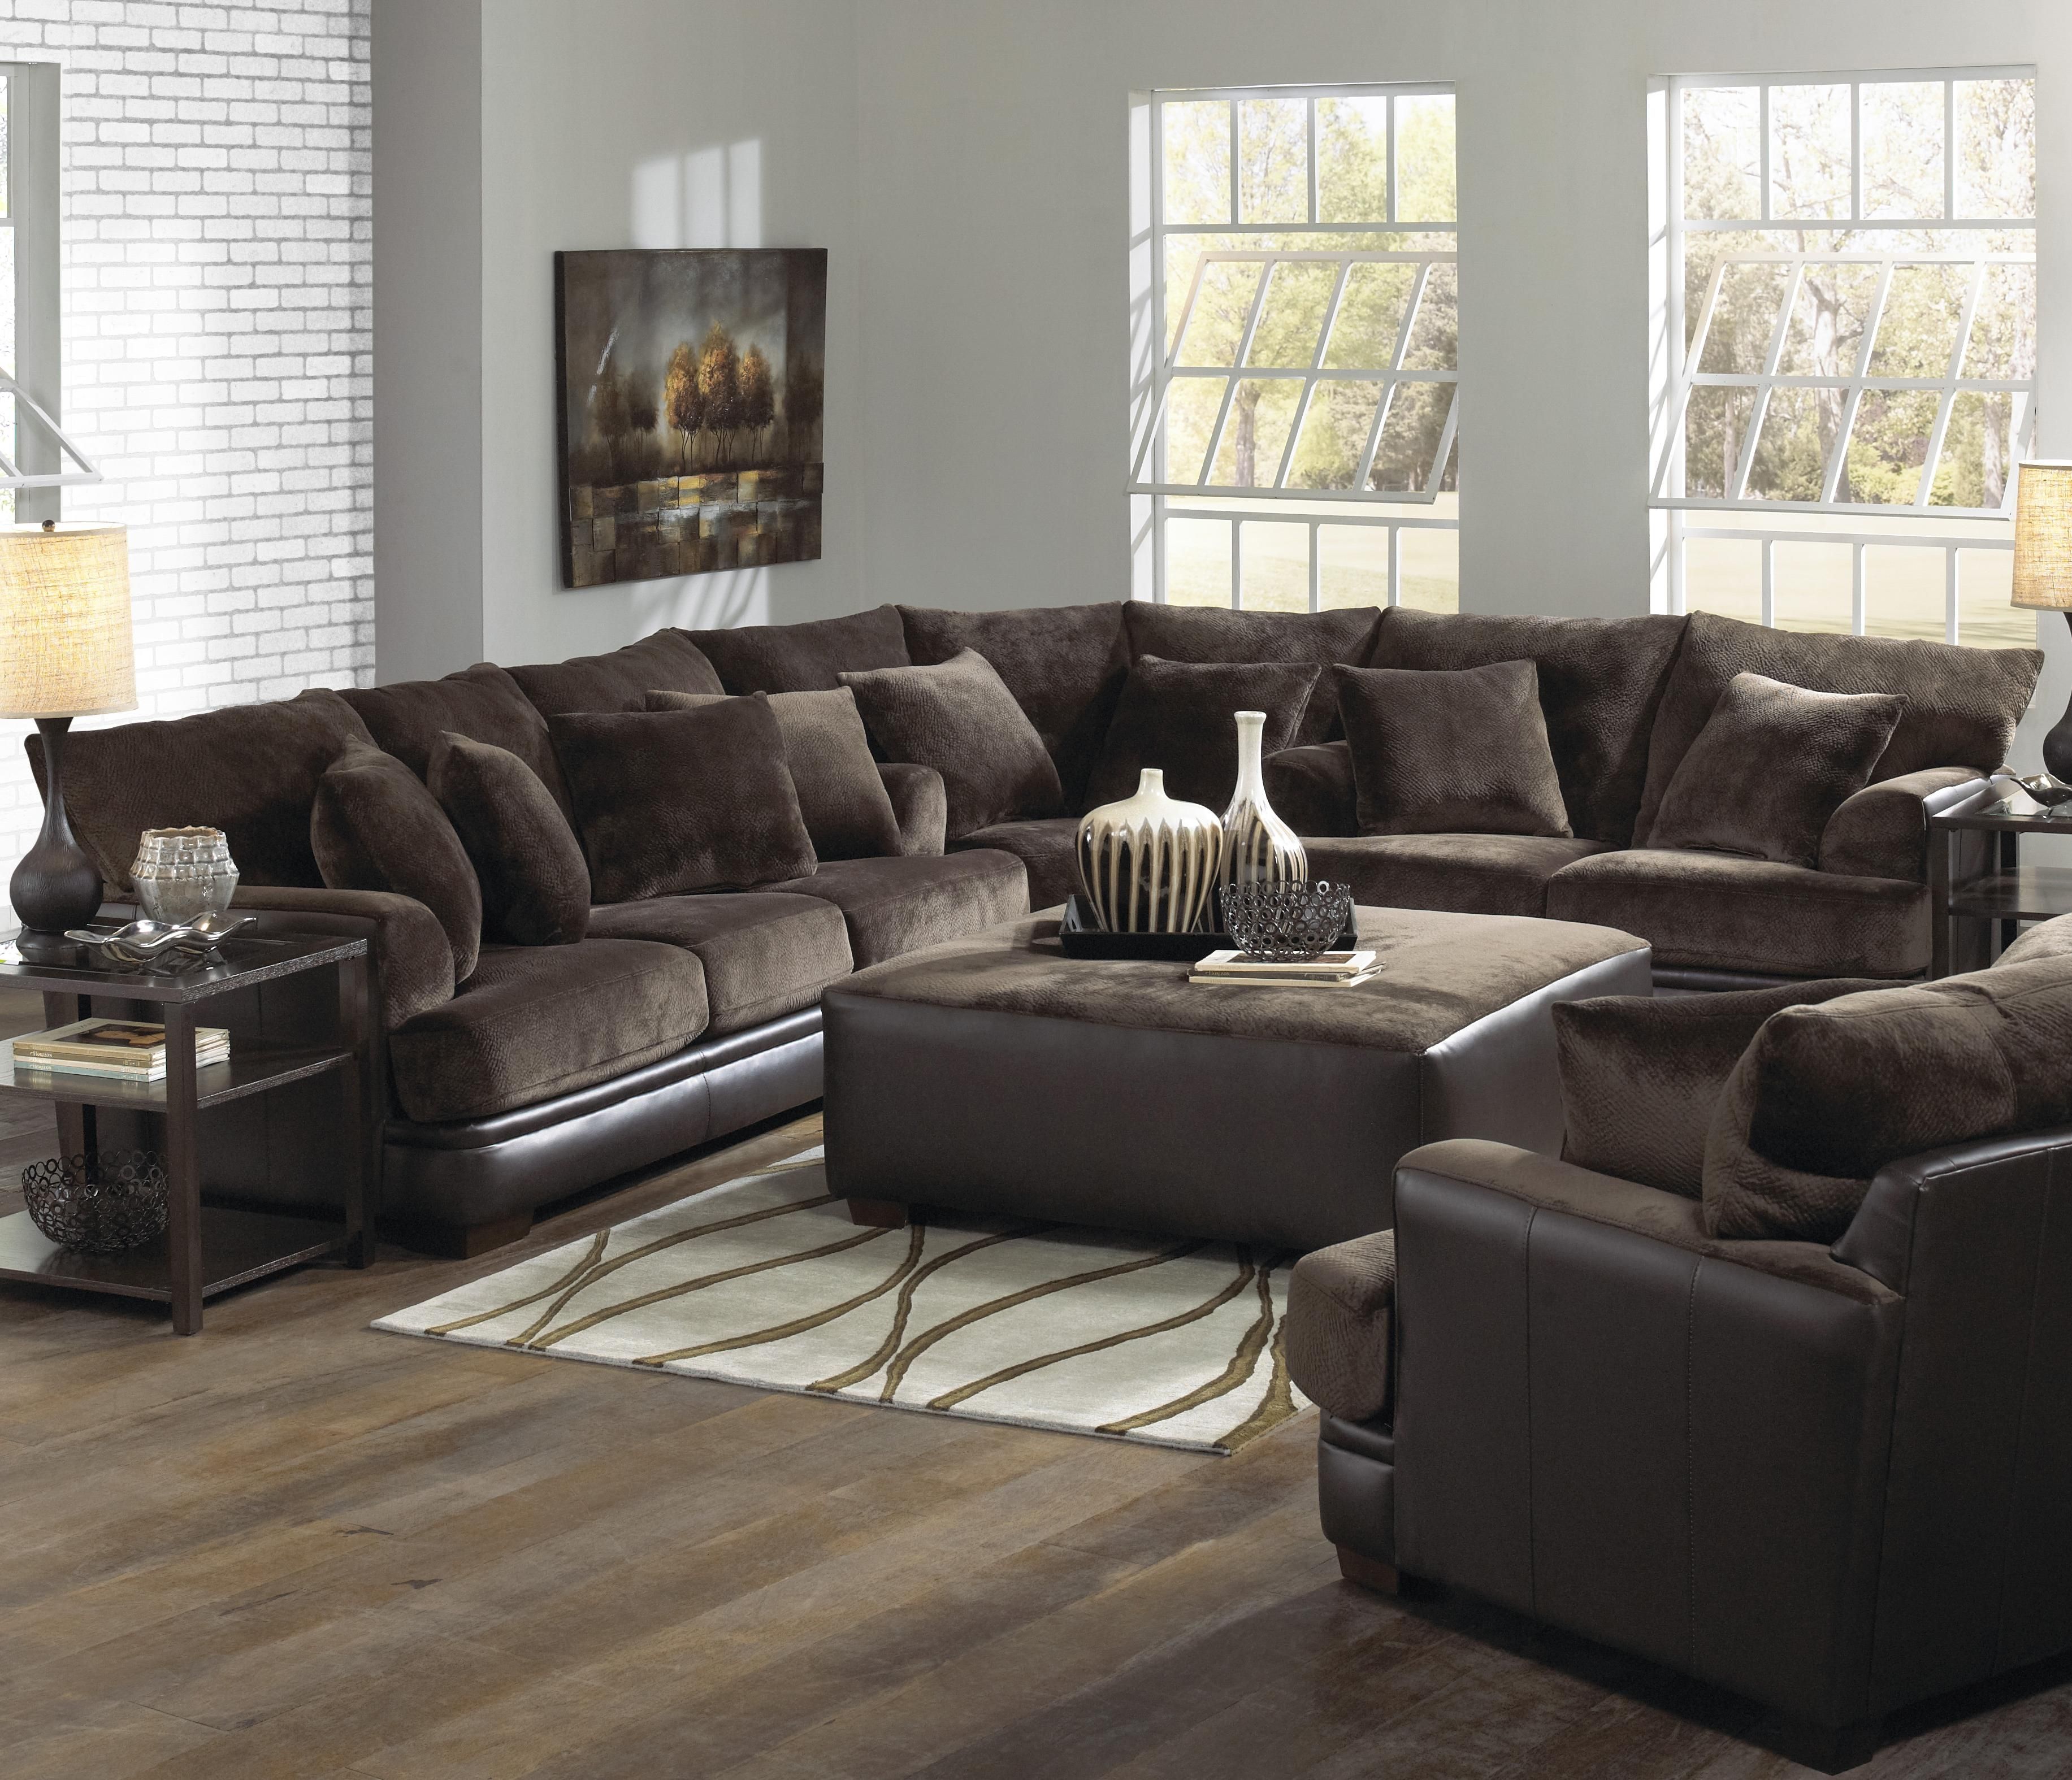 Sofas Center High Quality Sectional Sofas Cleanupflorida Com In Abbyson Living Charlotte Beige Sectional Sofa And Ottoman (View 9 of 15)